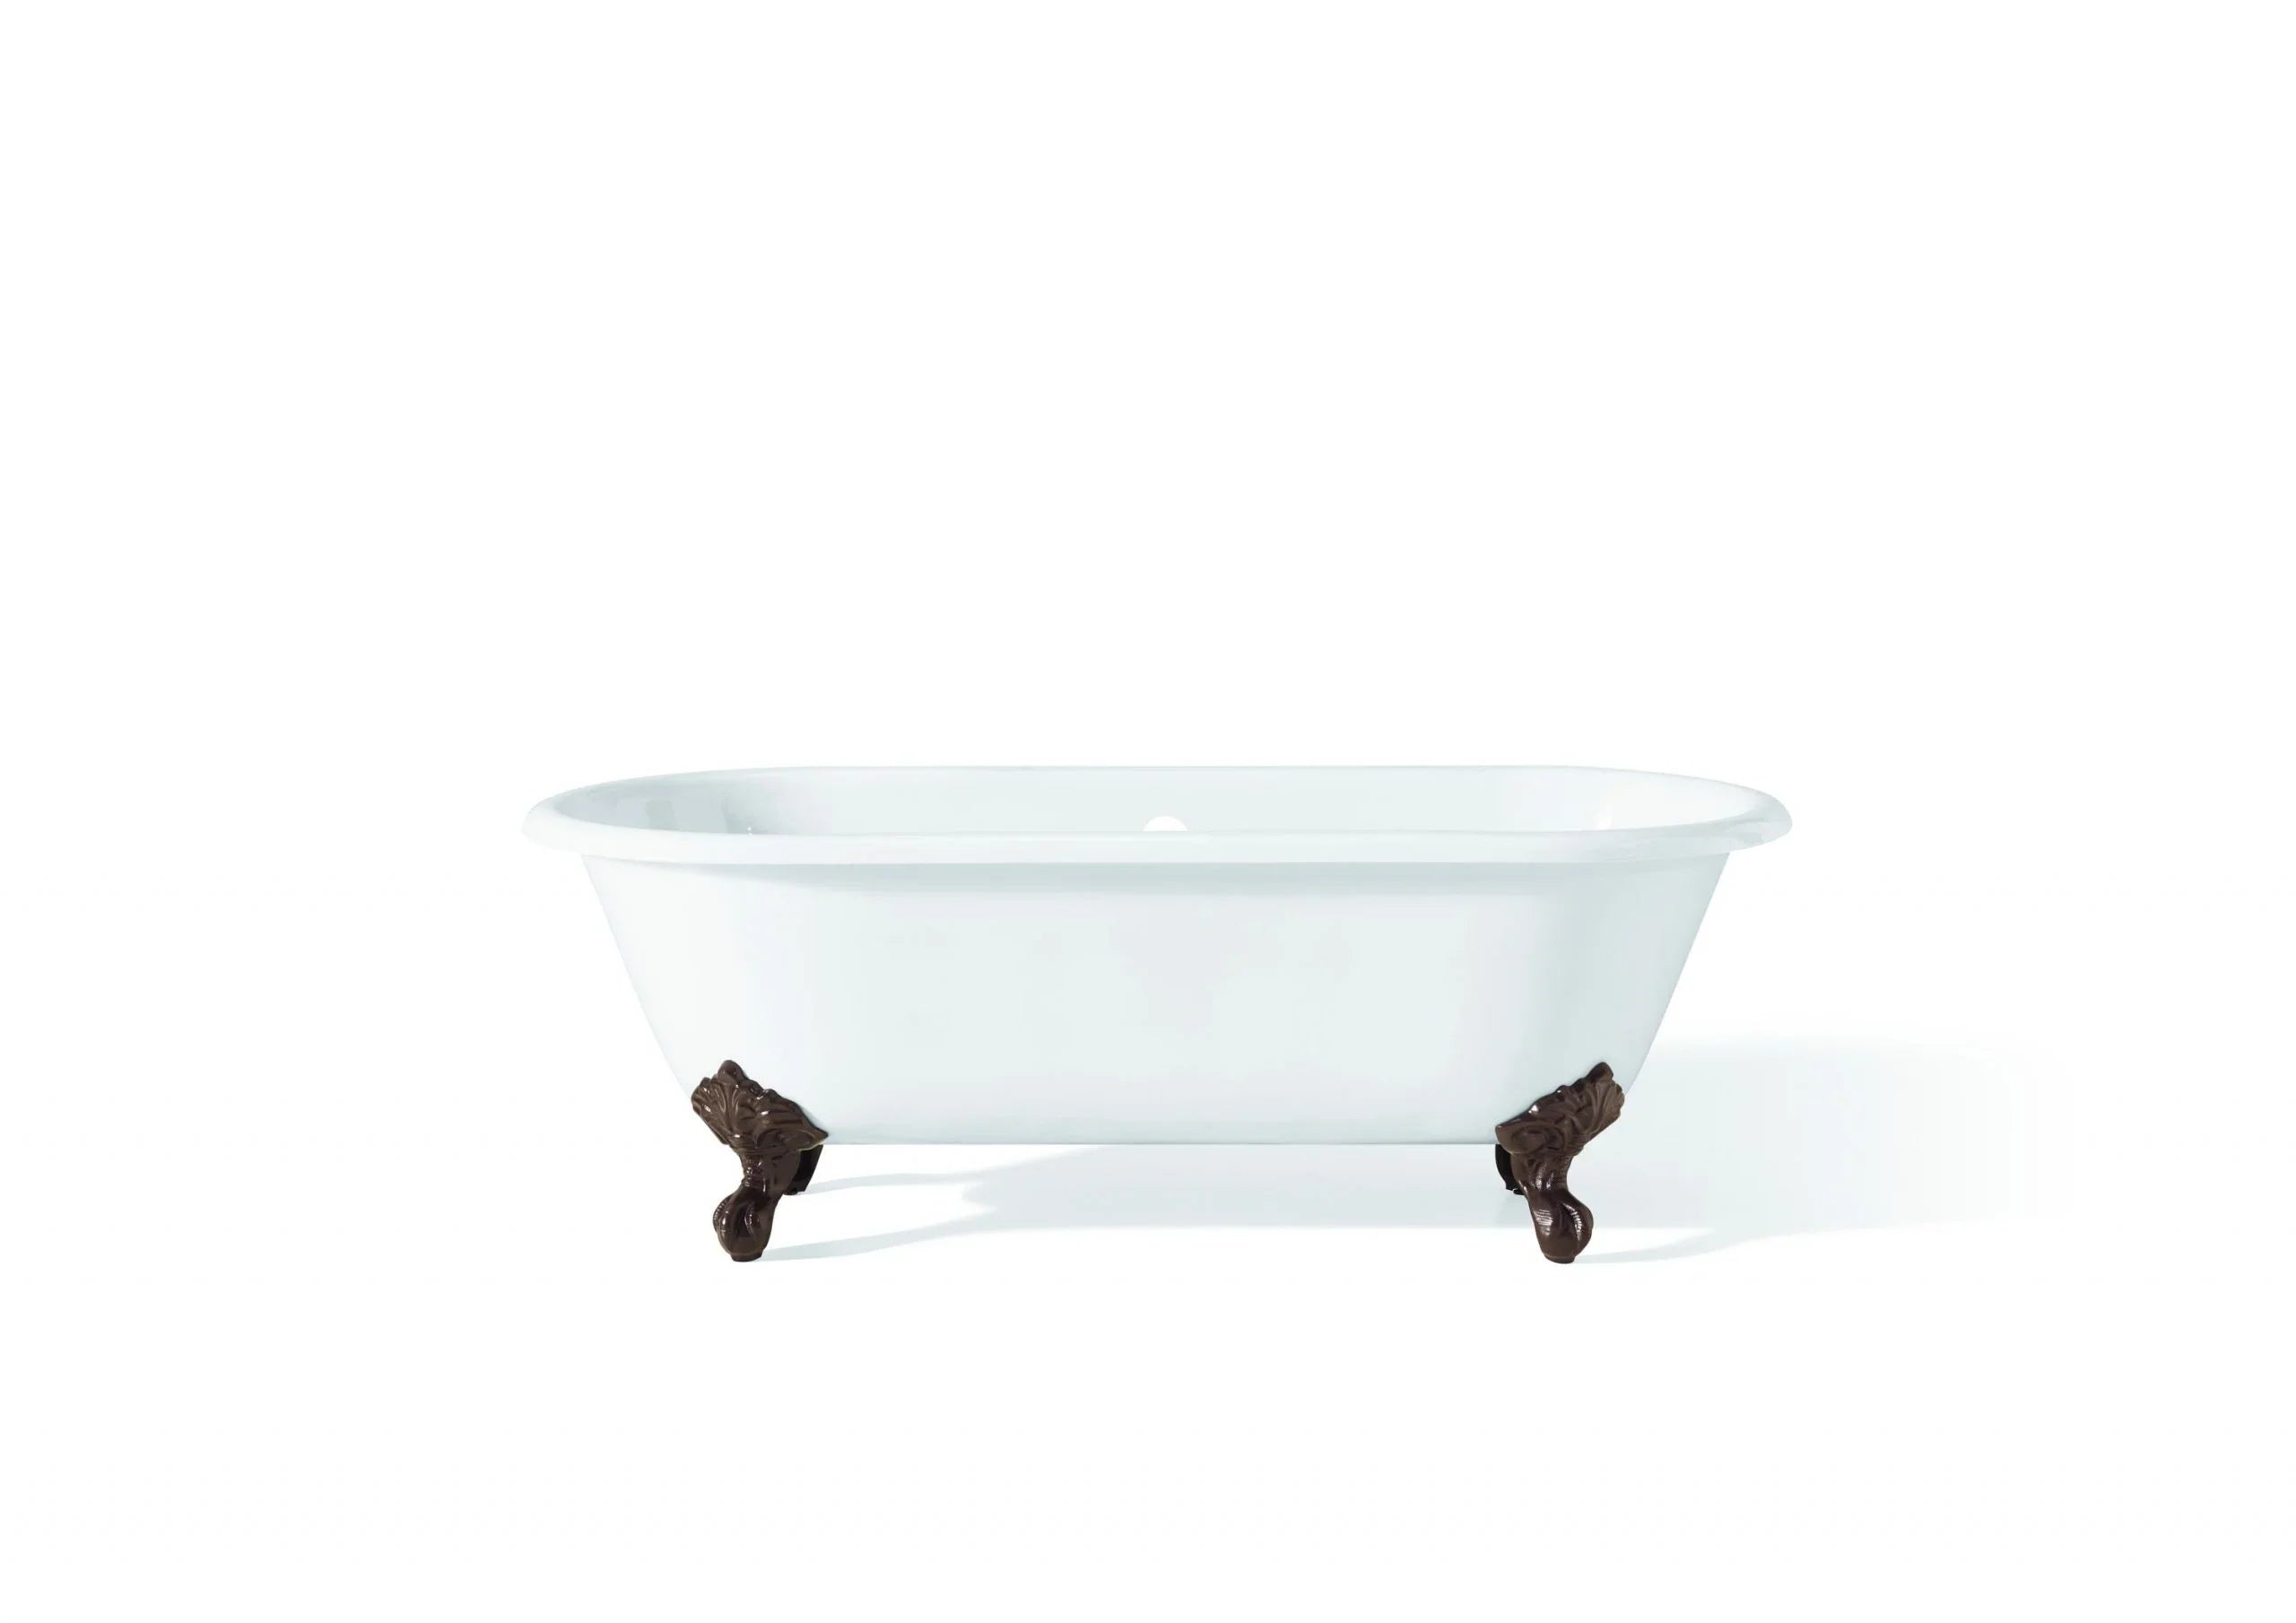 REGAL Cast Iron Clawfoot Bath With Continuous Rolled Rim (Small)